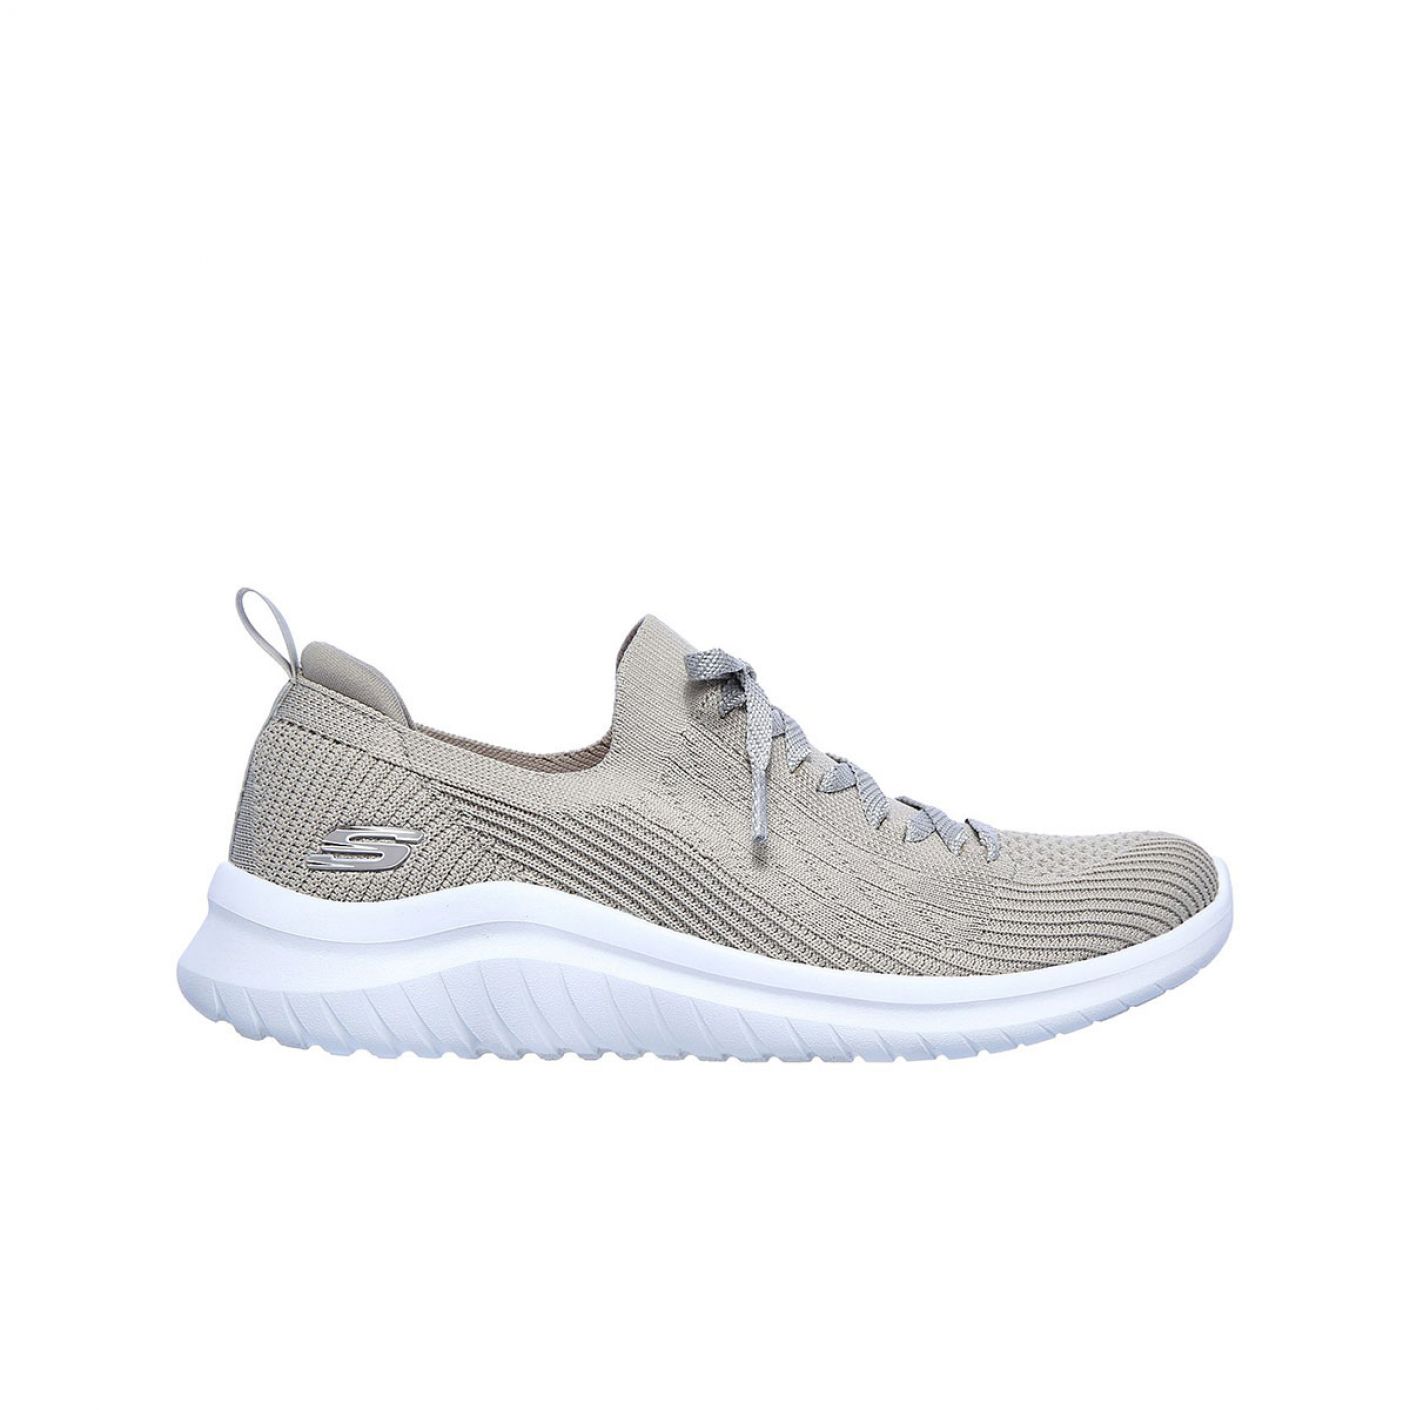 Skechers Ultra Flex 2.0 Flash Illusion Taupe for Women